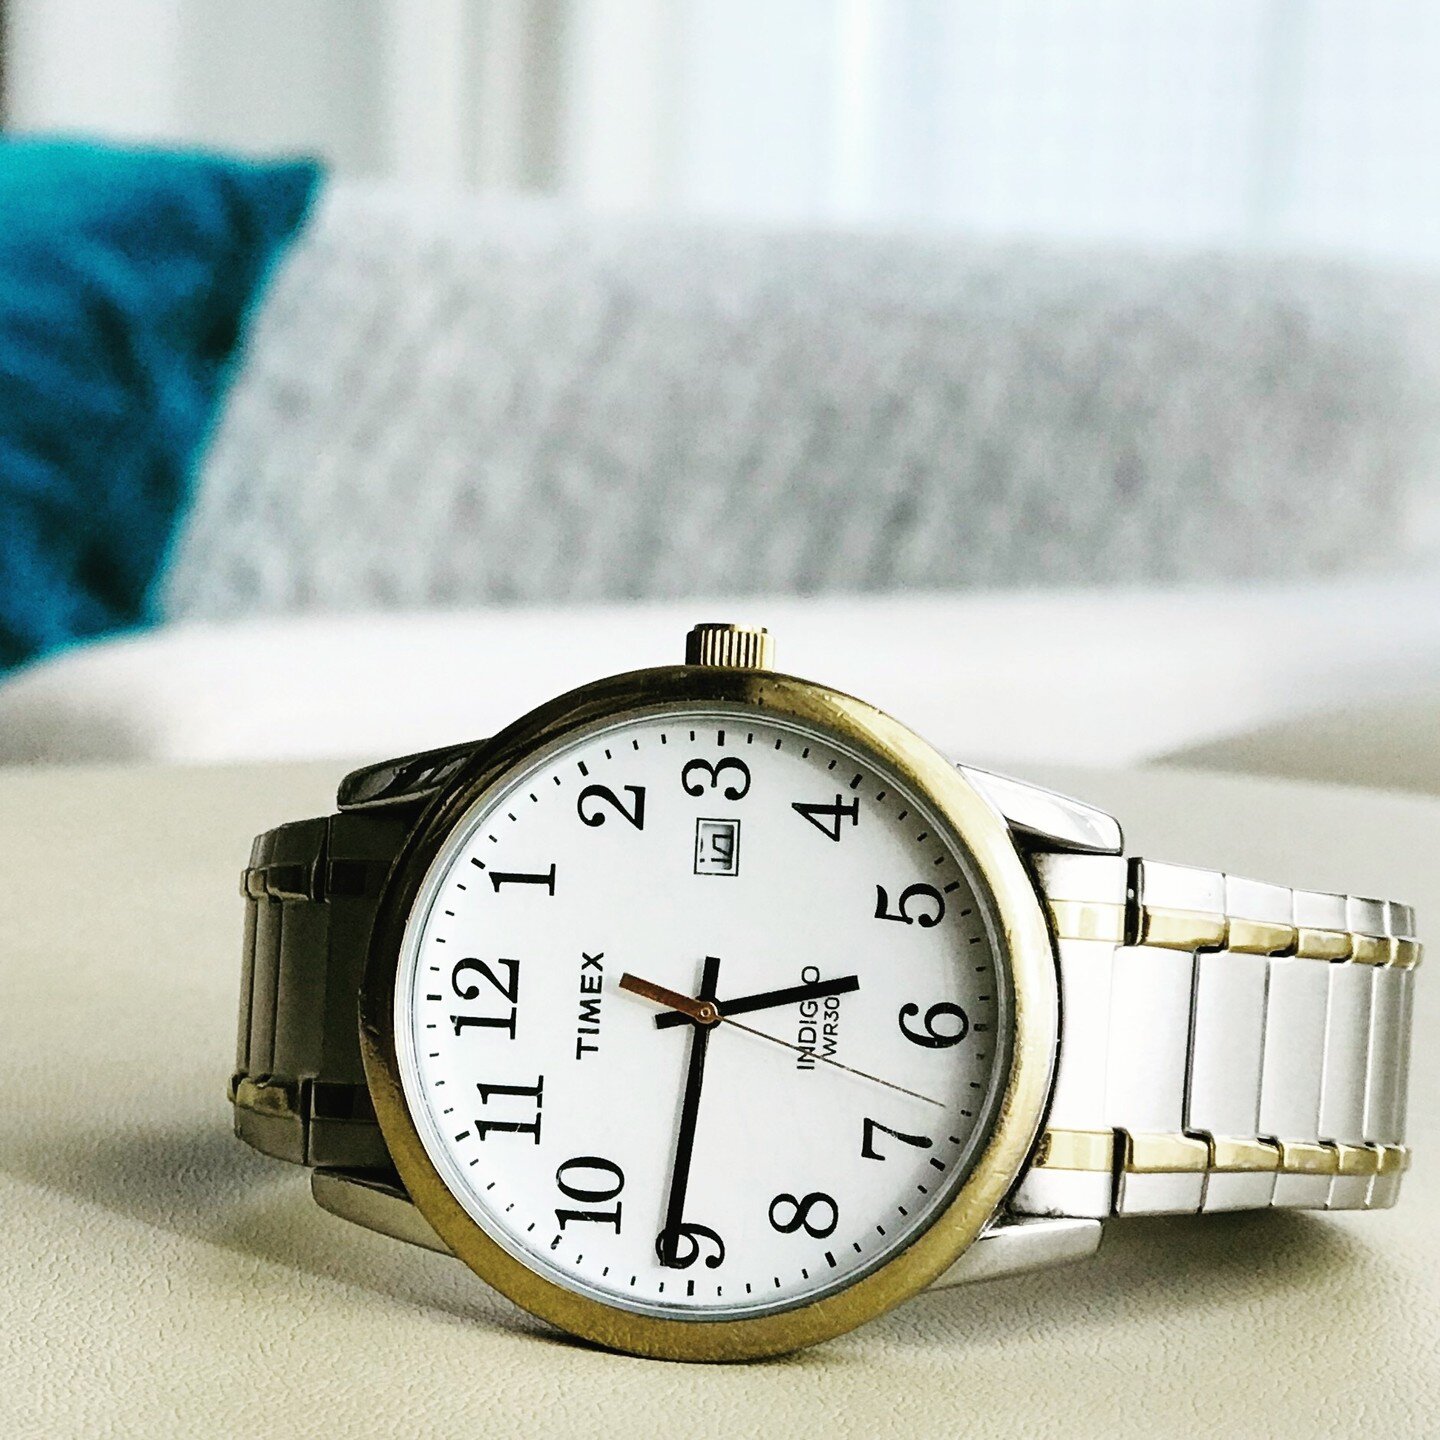 At just the right time, my watch stopped. 

After wearing out 6 watches over many decades, this summer I attended my last birth as a FT homebirth midwife. Exactly one week later, this one quietly surrendered.

Leading to musings about being busy, bei